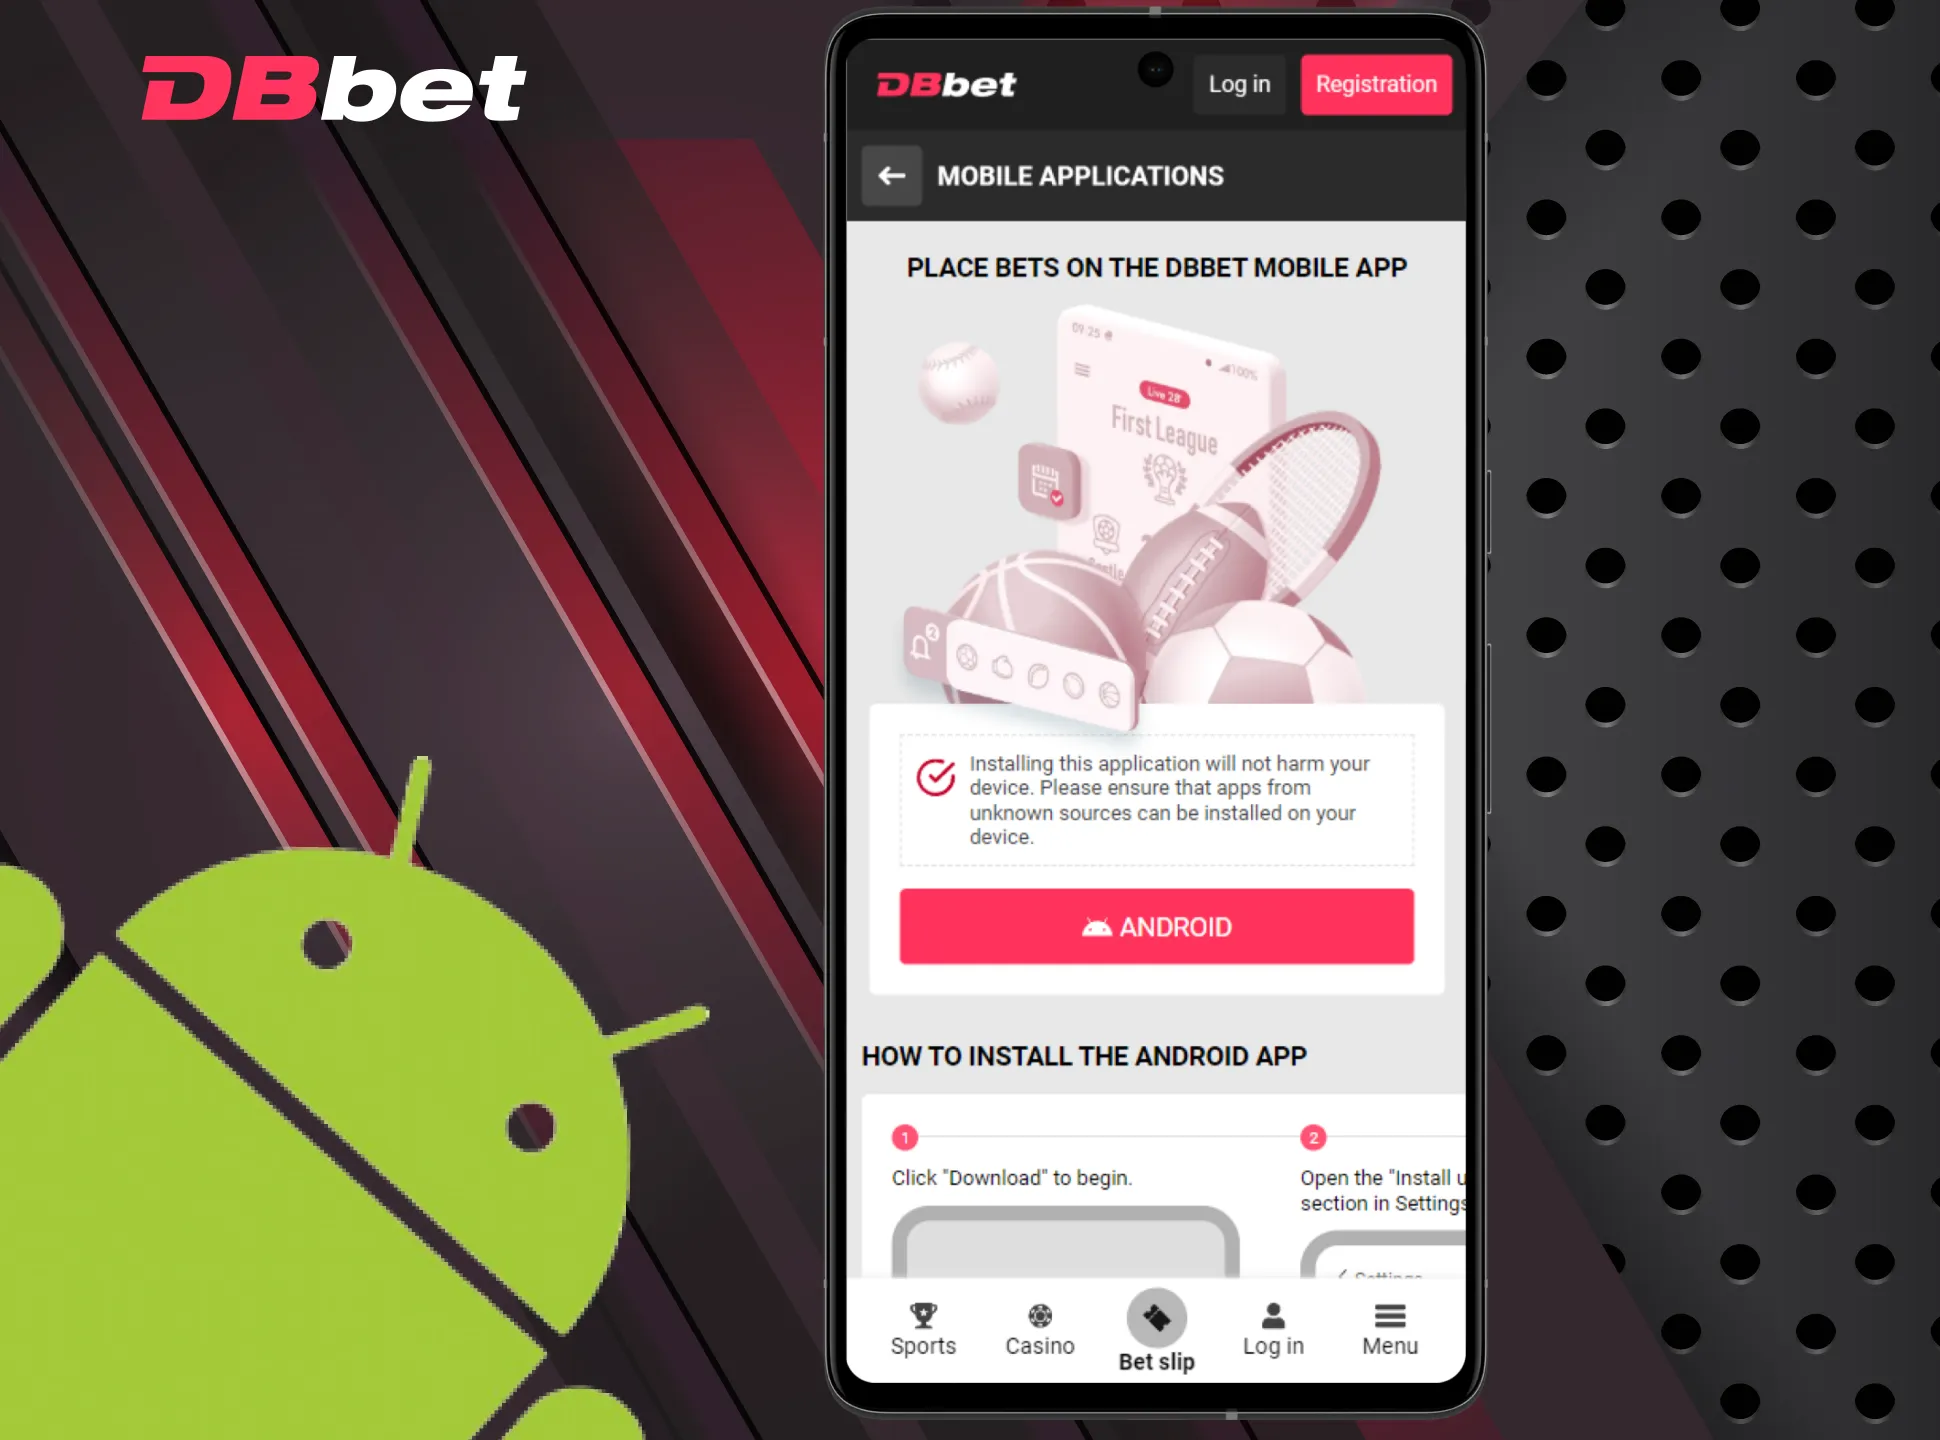 Install DBbet Android app on any of Android devices.